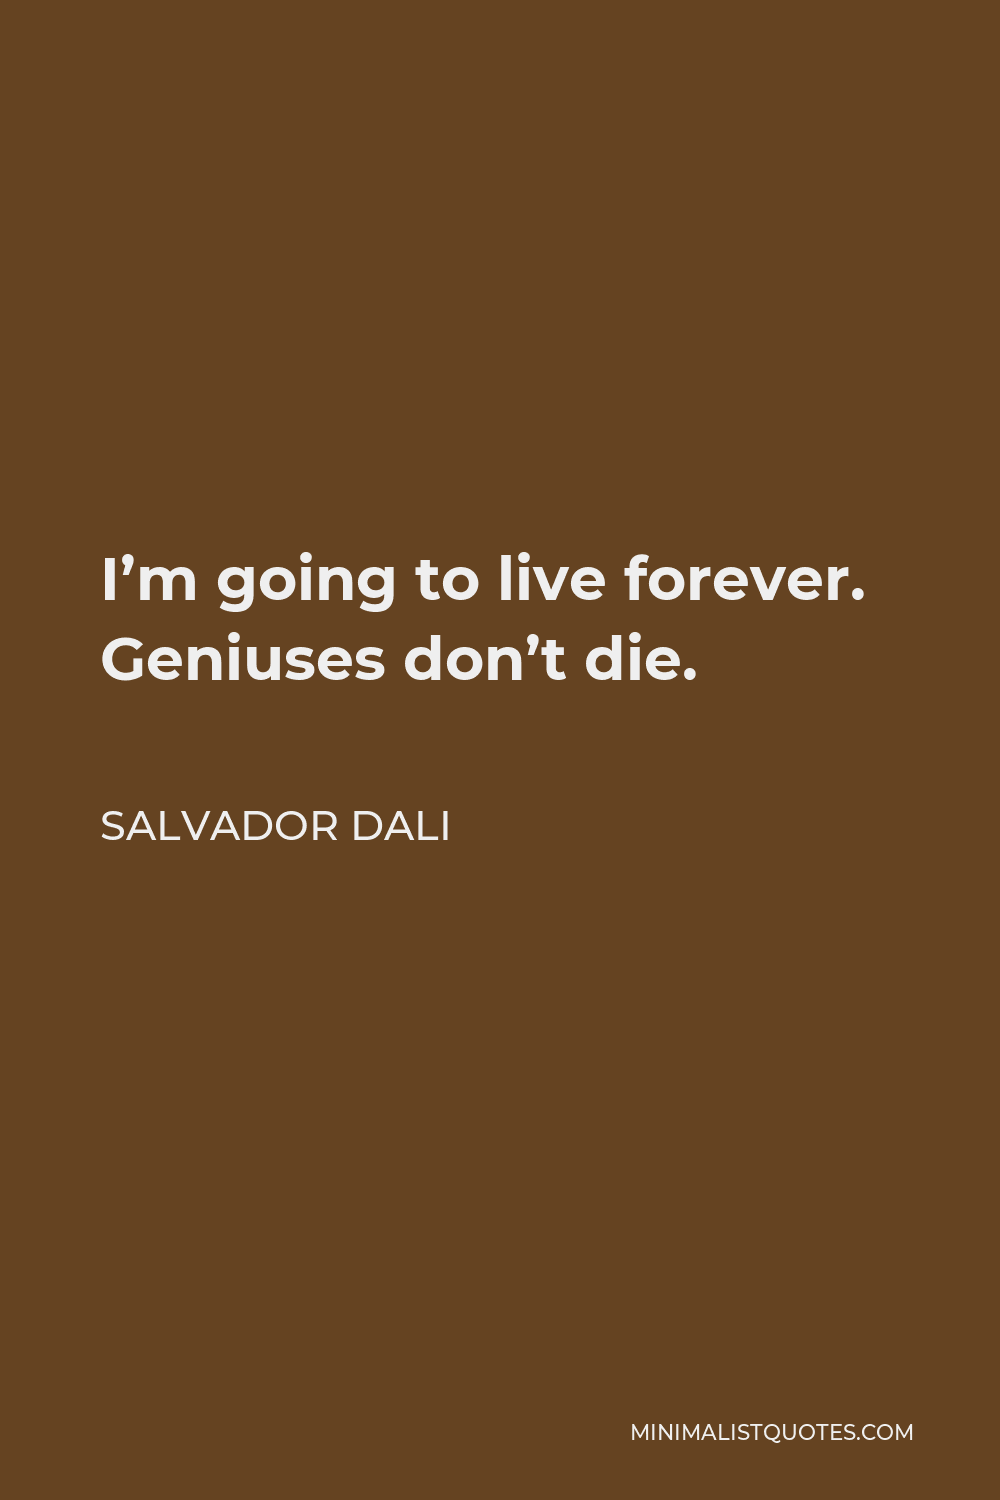 Salvador Dali Quote - I’m going to live forever. Geniuses don’t die.